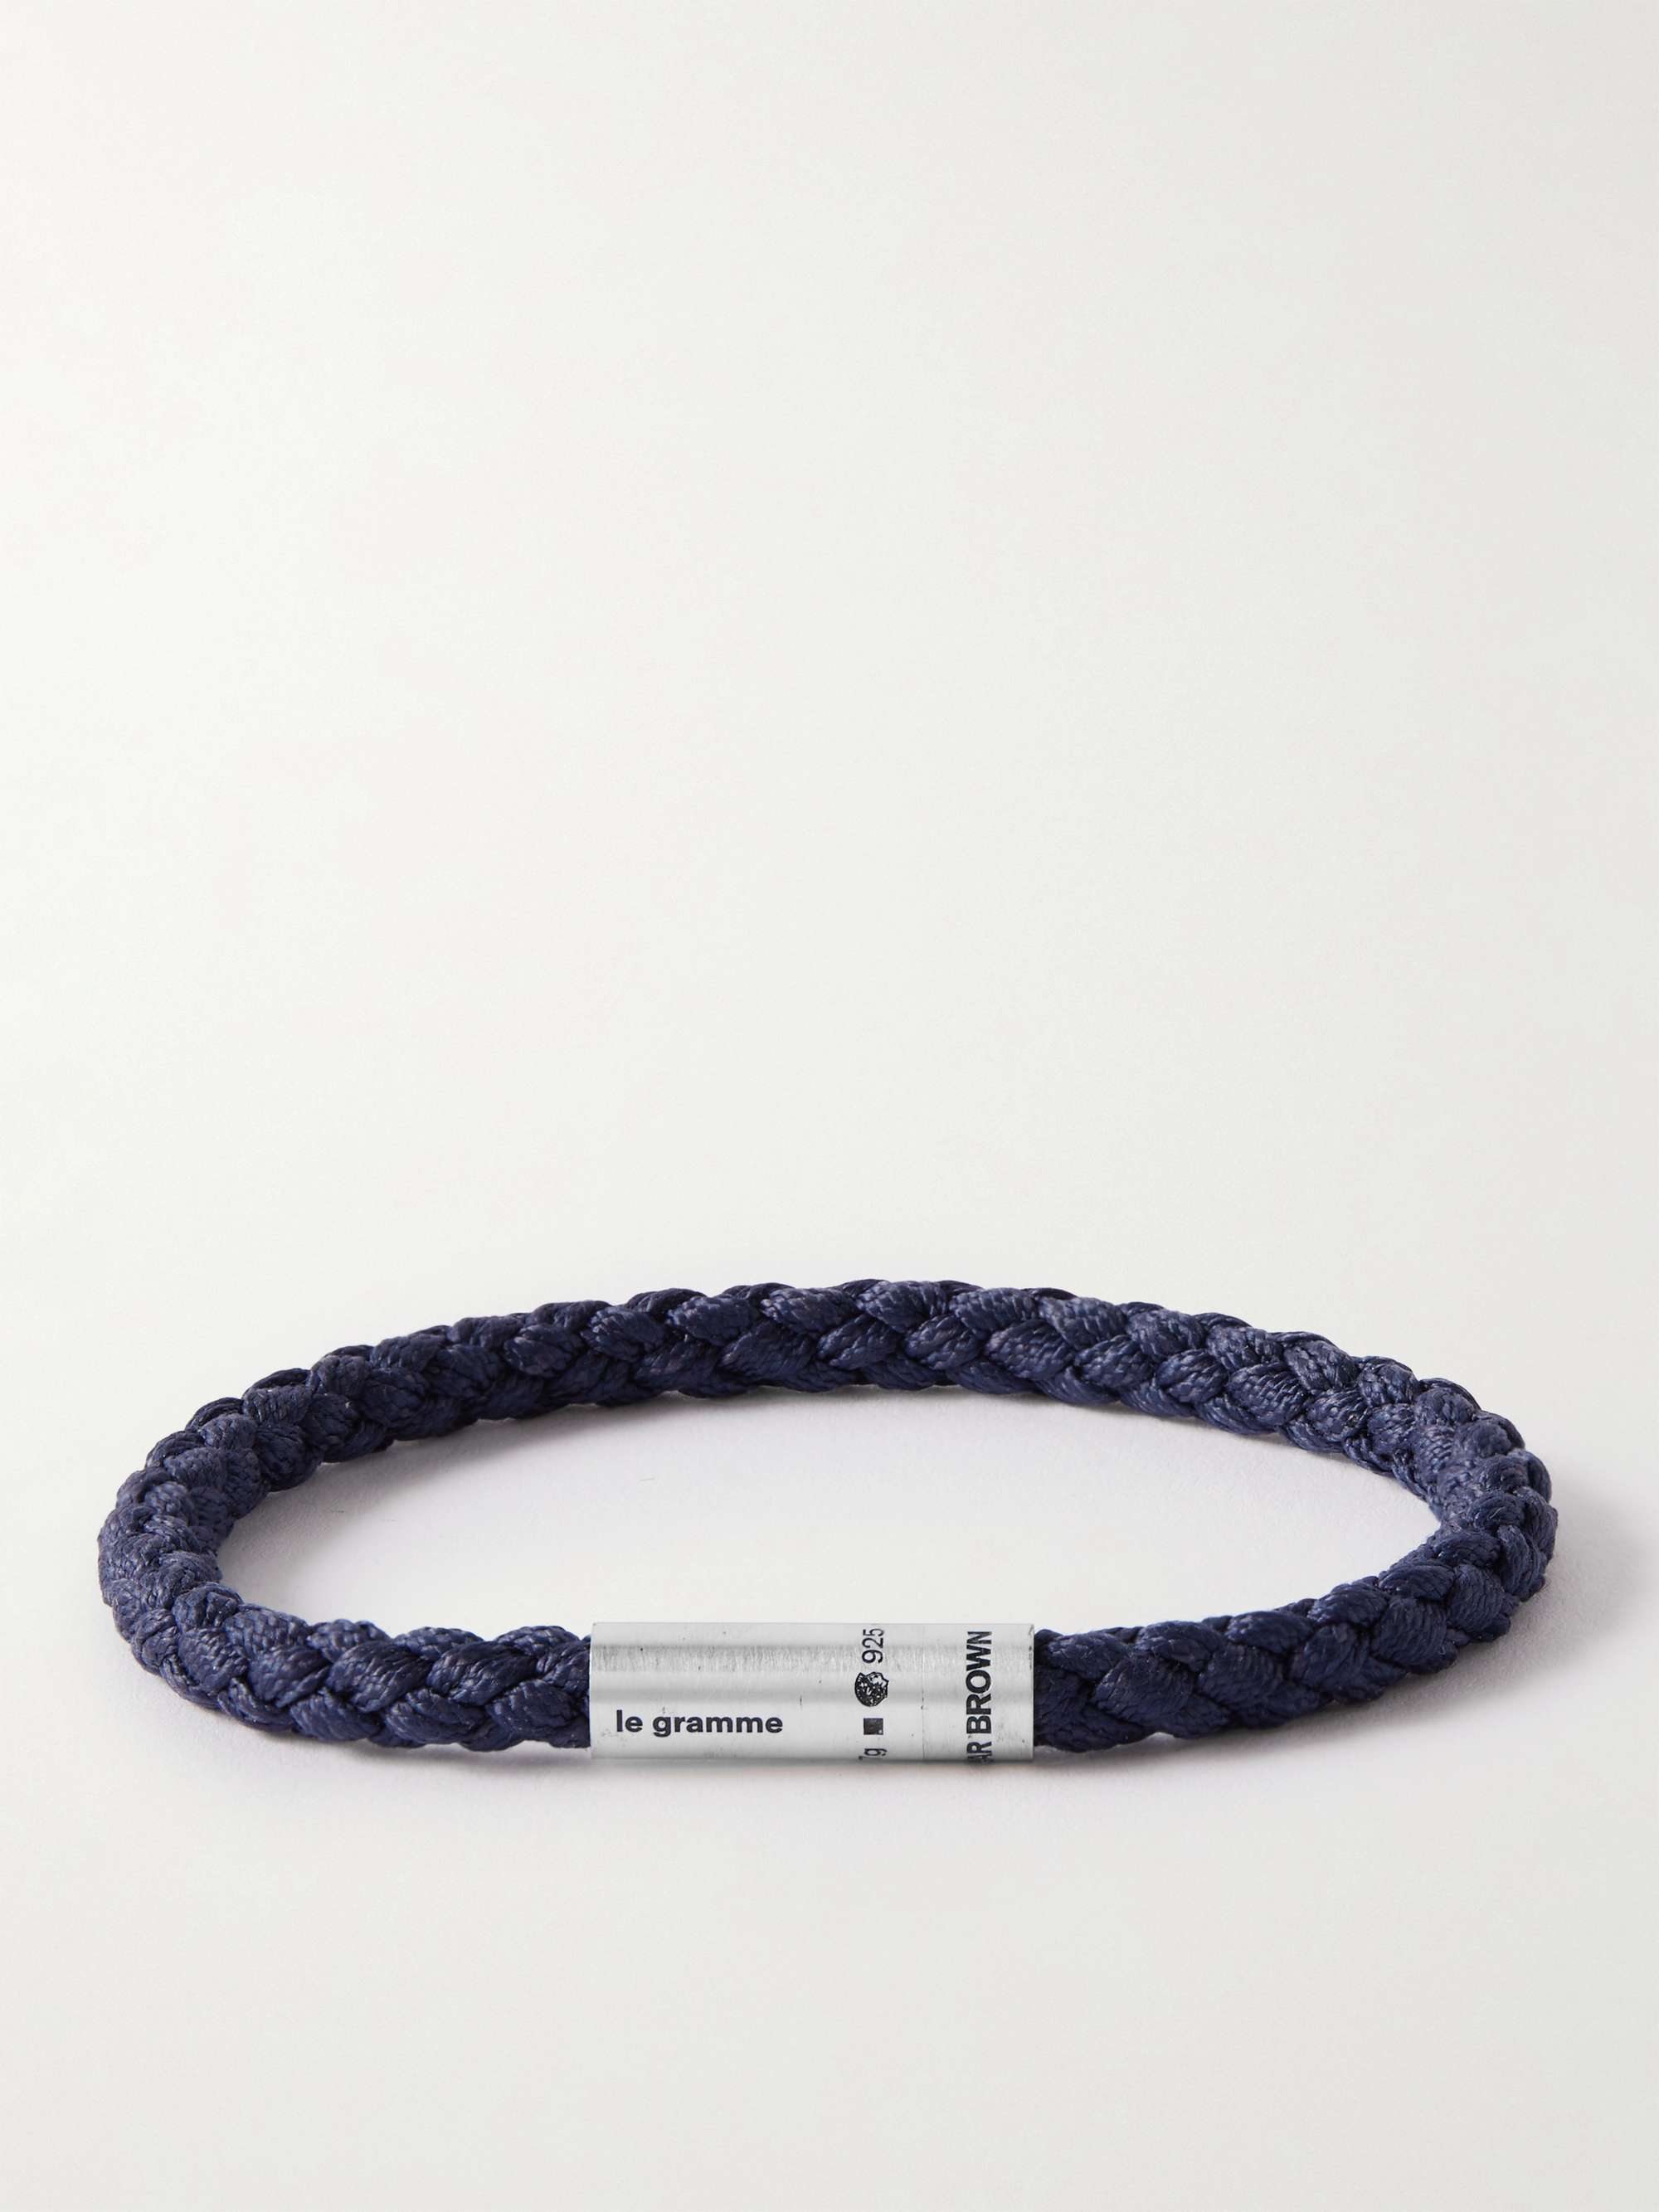 LE GRAMME + Orlebar Brown 7g Woven Cord and Sterling Silver Bracelet